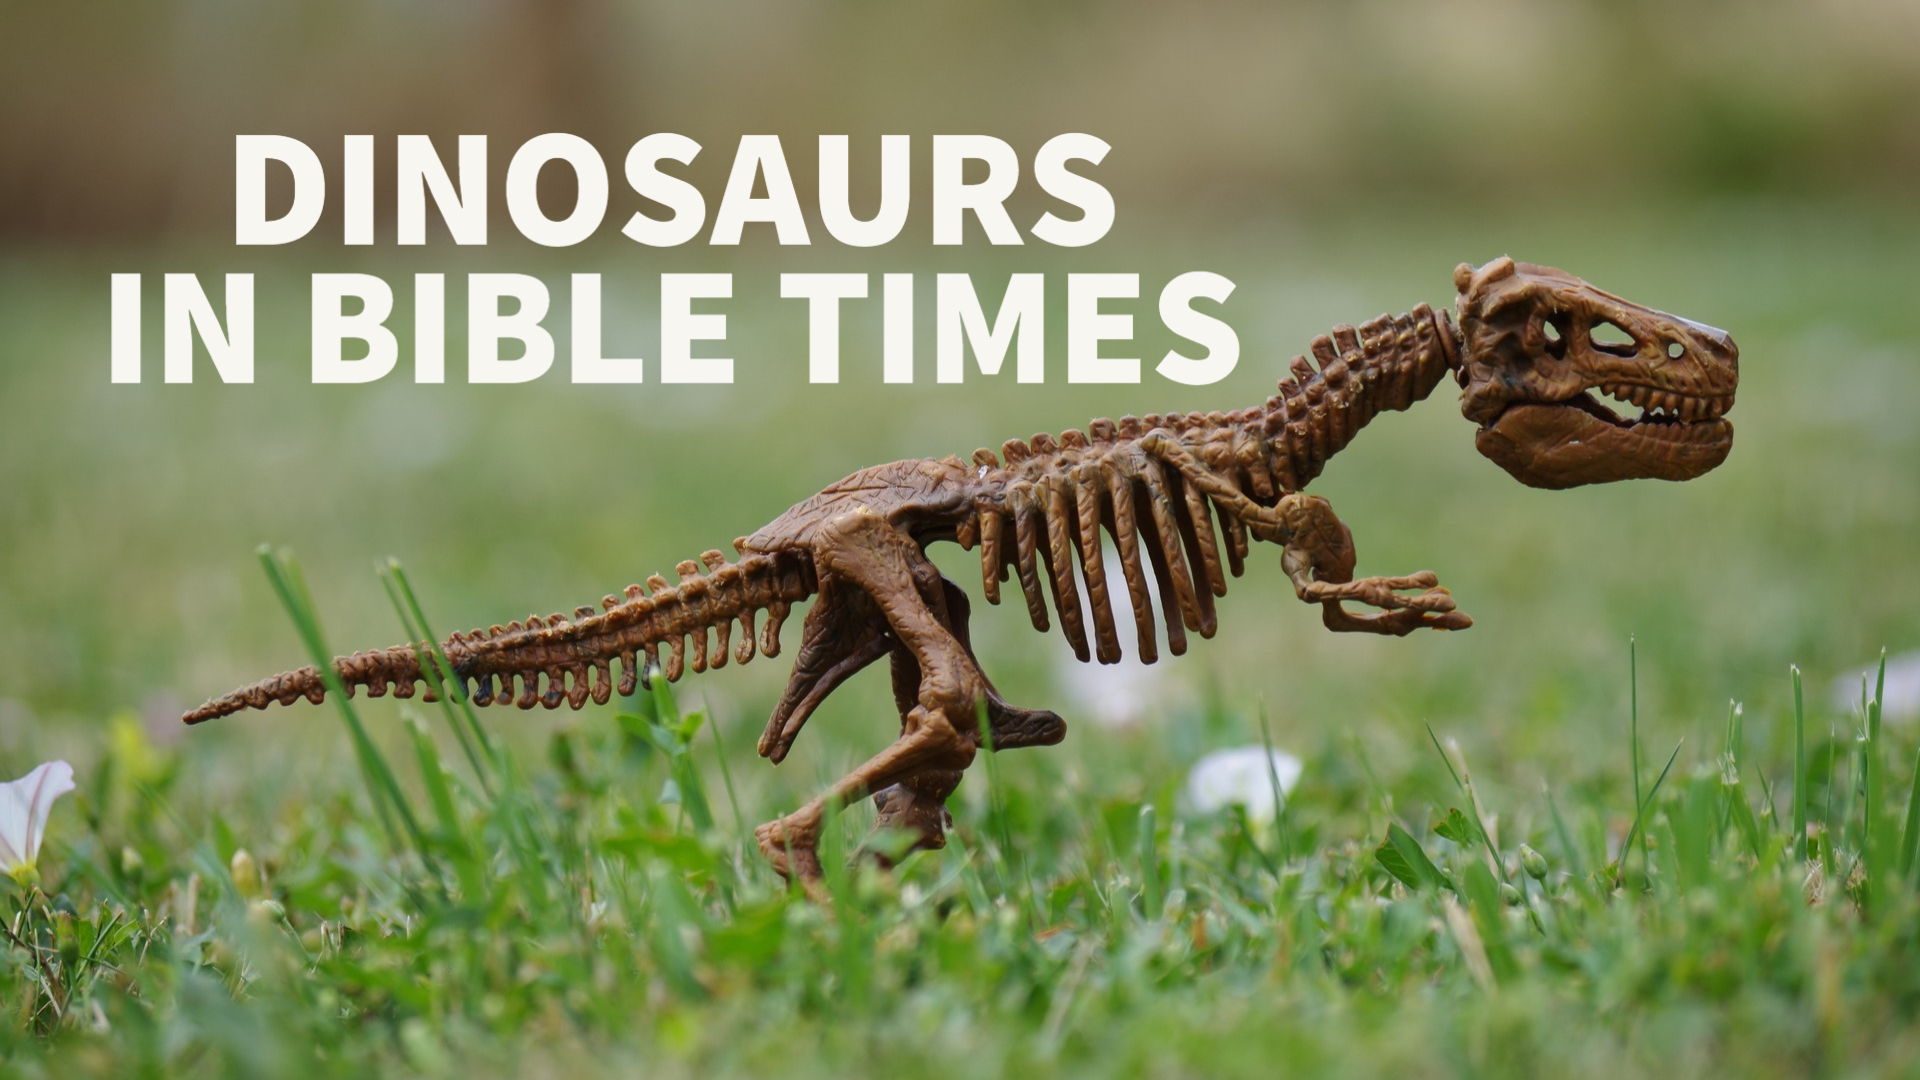 How Do Dinosaurs Fit Into The Bible Timeline?